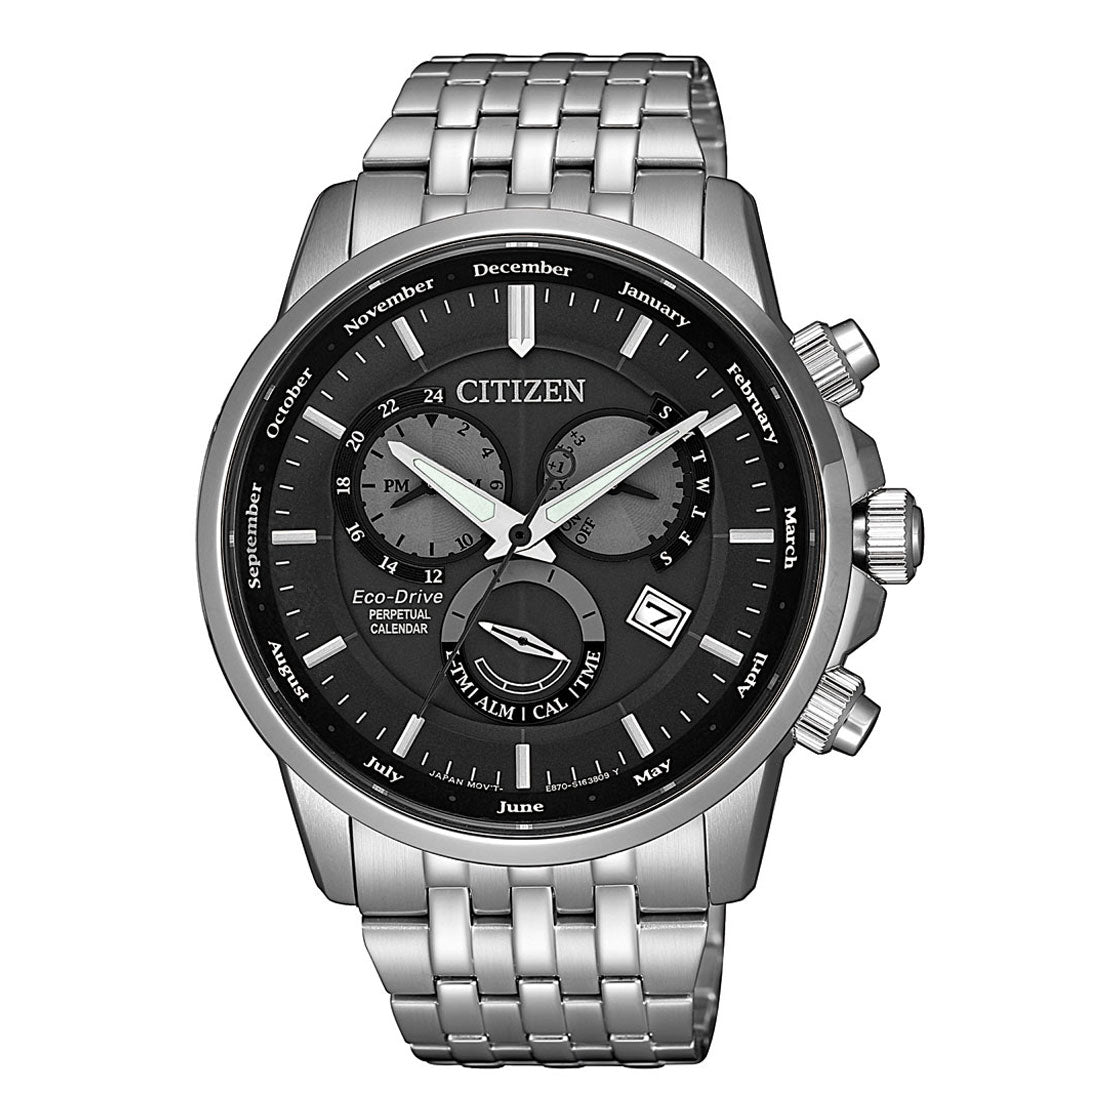 CITIZEN ECO-DRIVE GENTS WATCH GREY DIAL - BL8150-86H